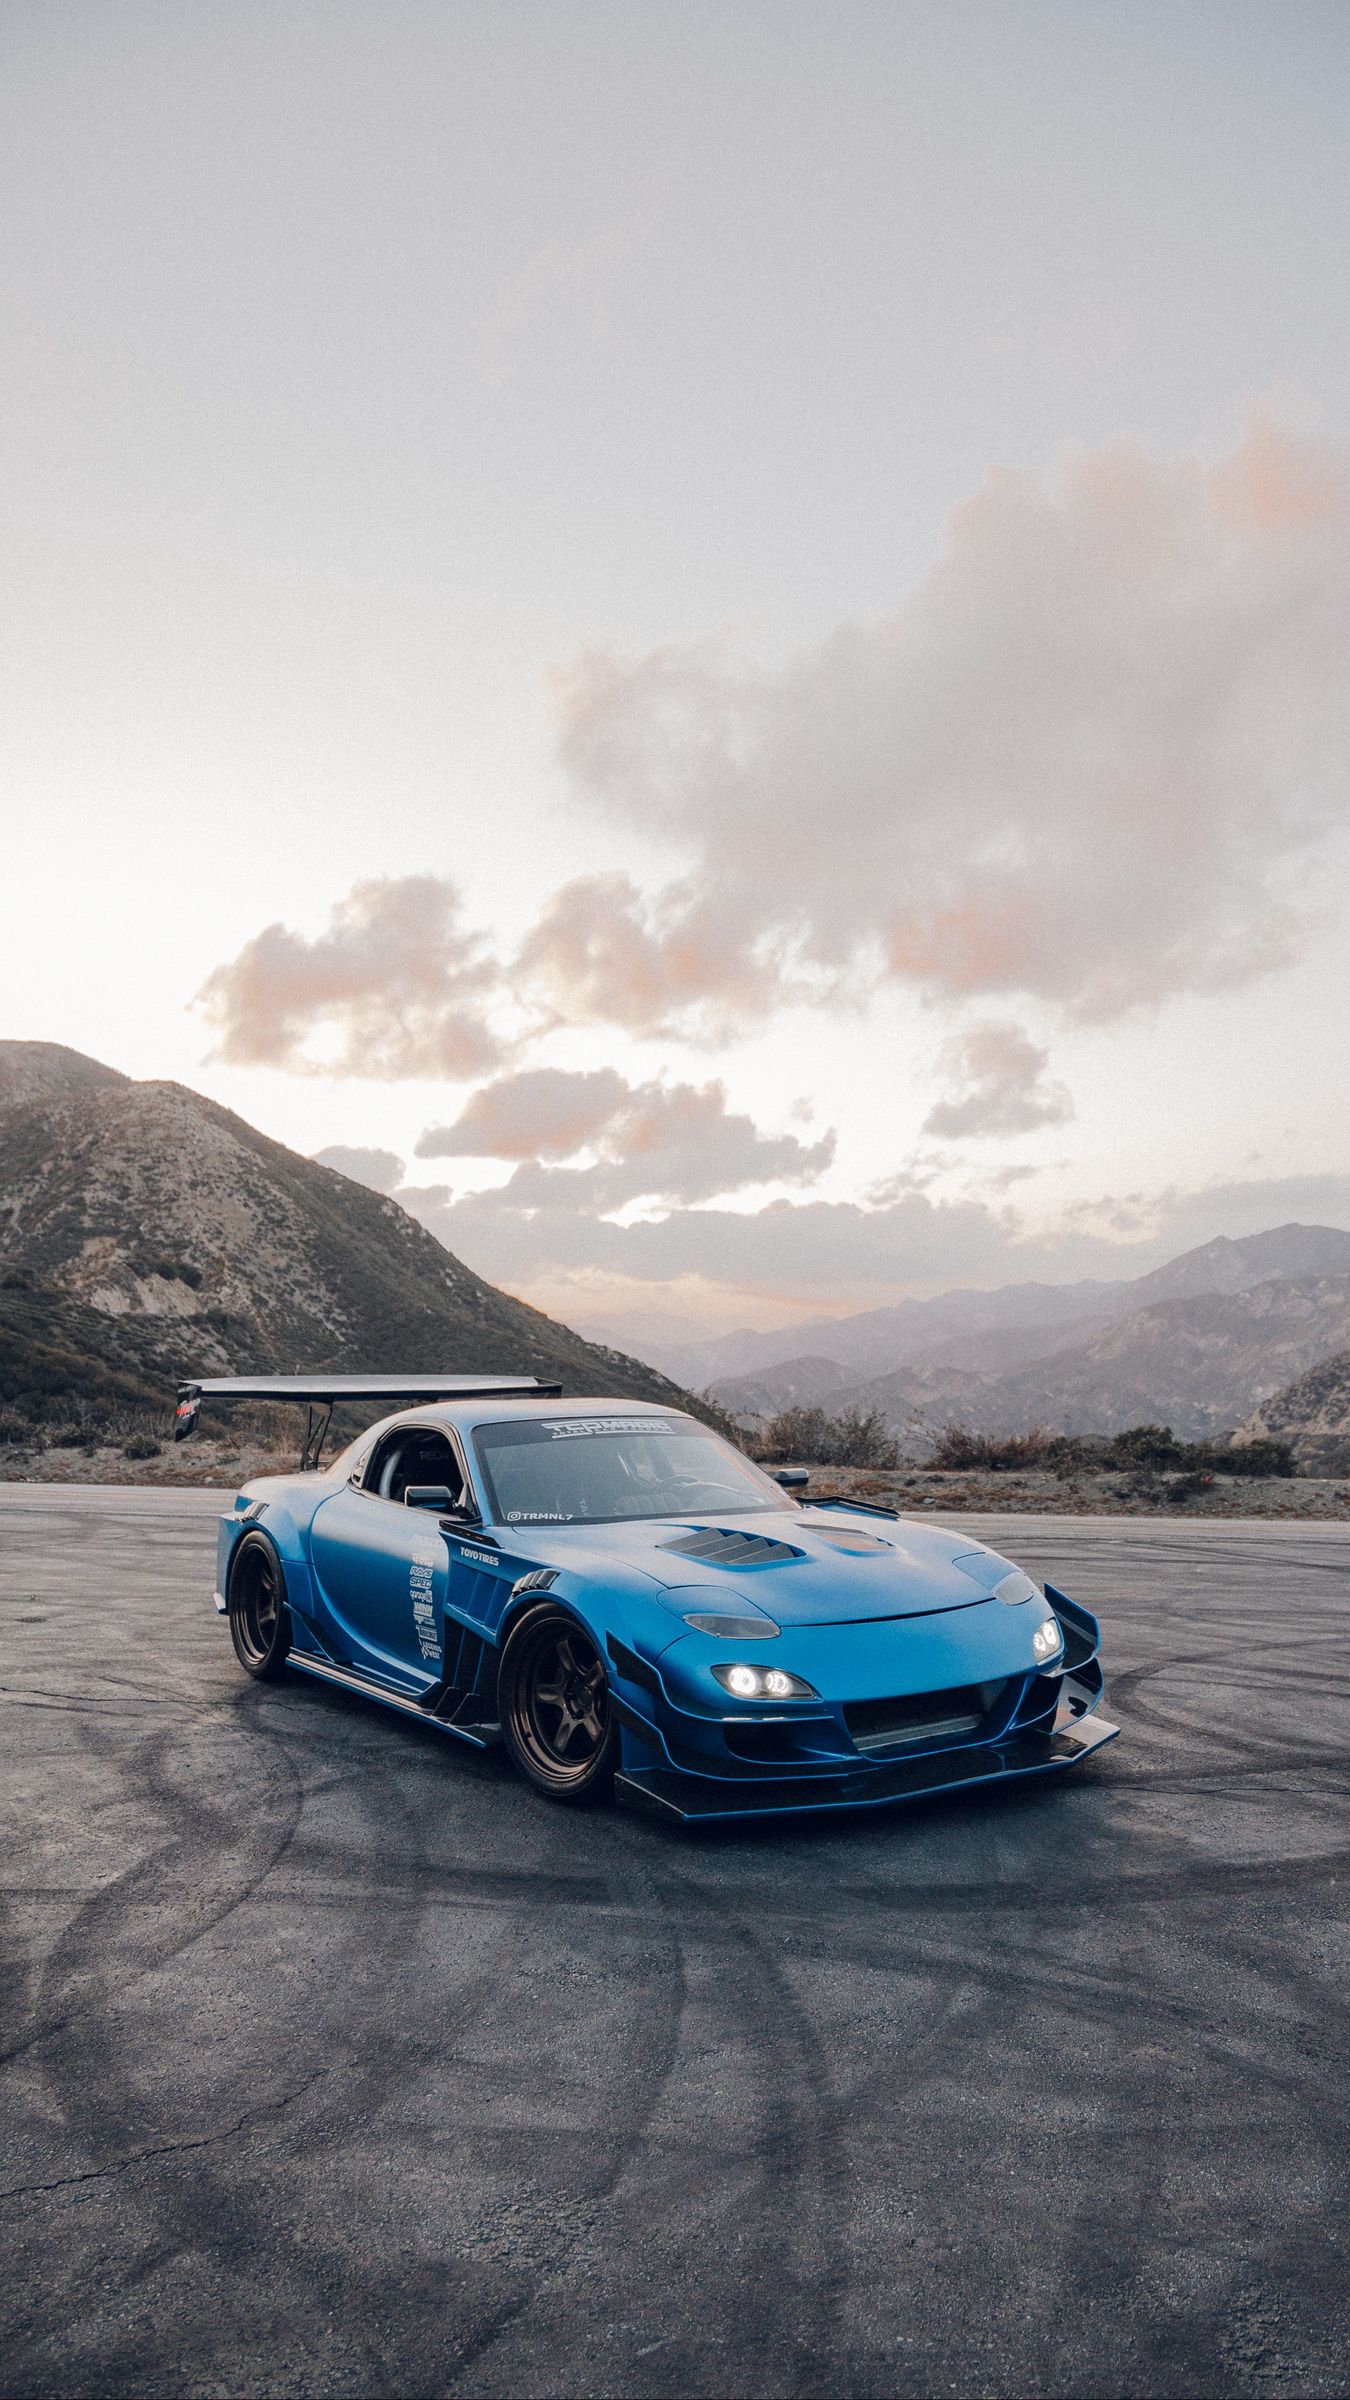 Edited a RX7 Wallpaper to my Preferences hope you guys enjoy